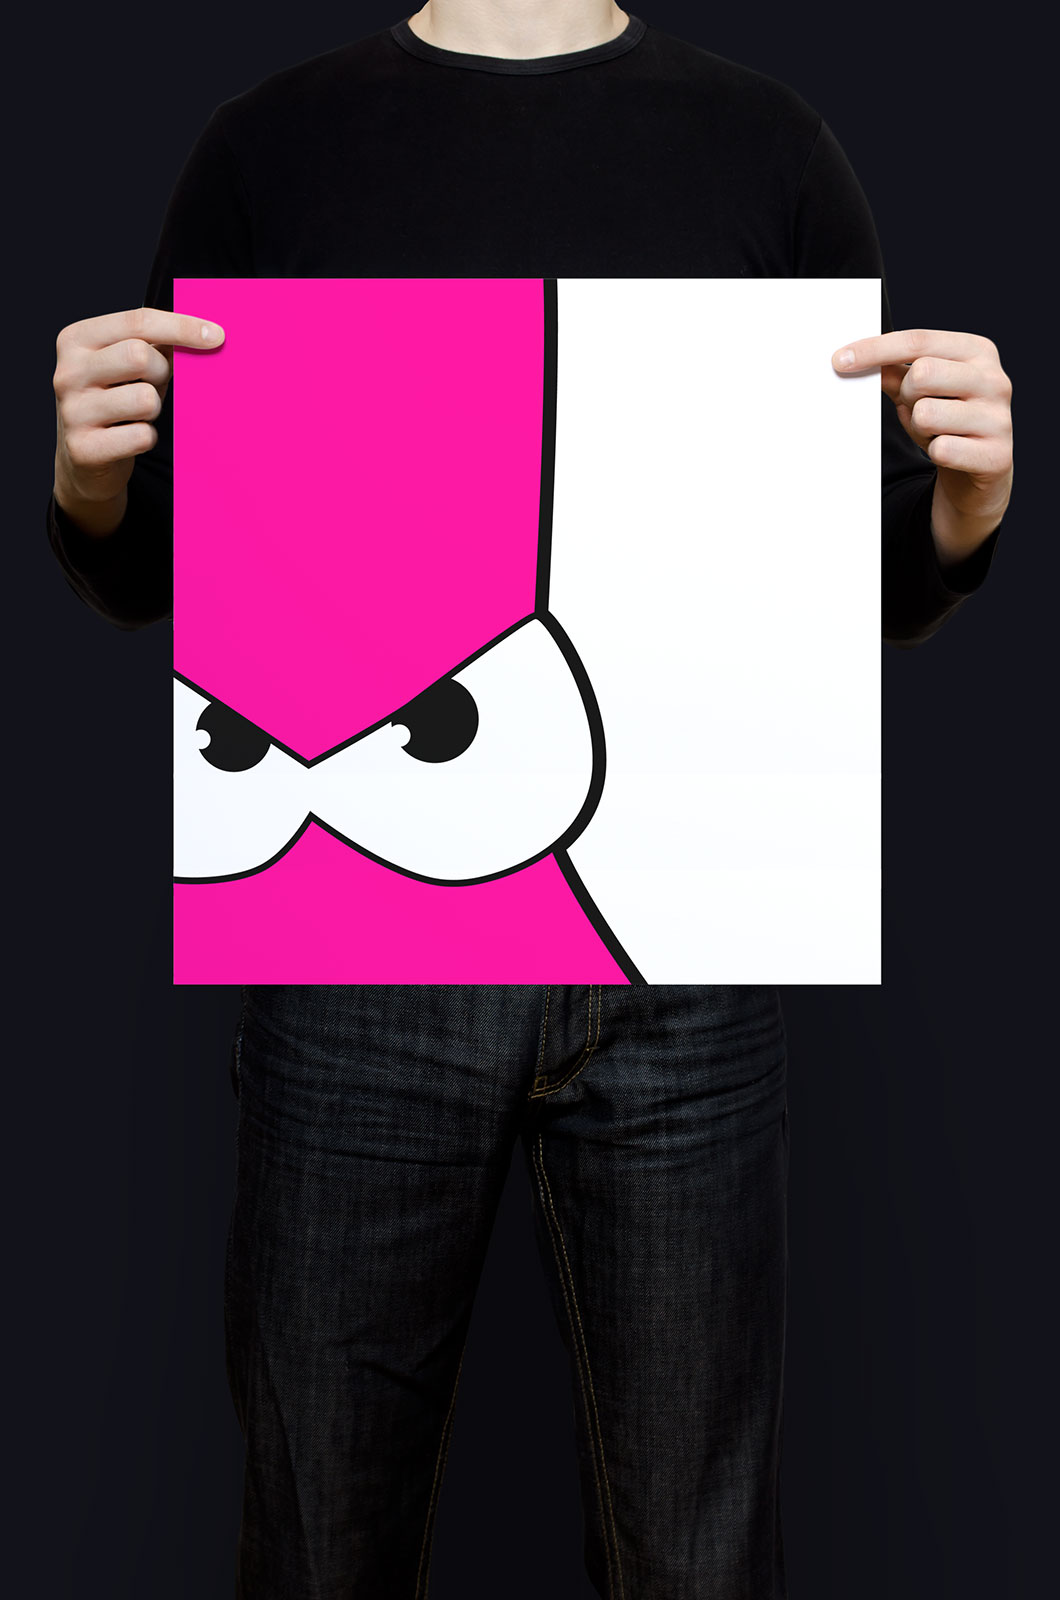 Alexander Glante - Works - The Pink Thing - 11